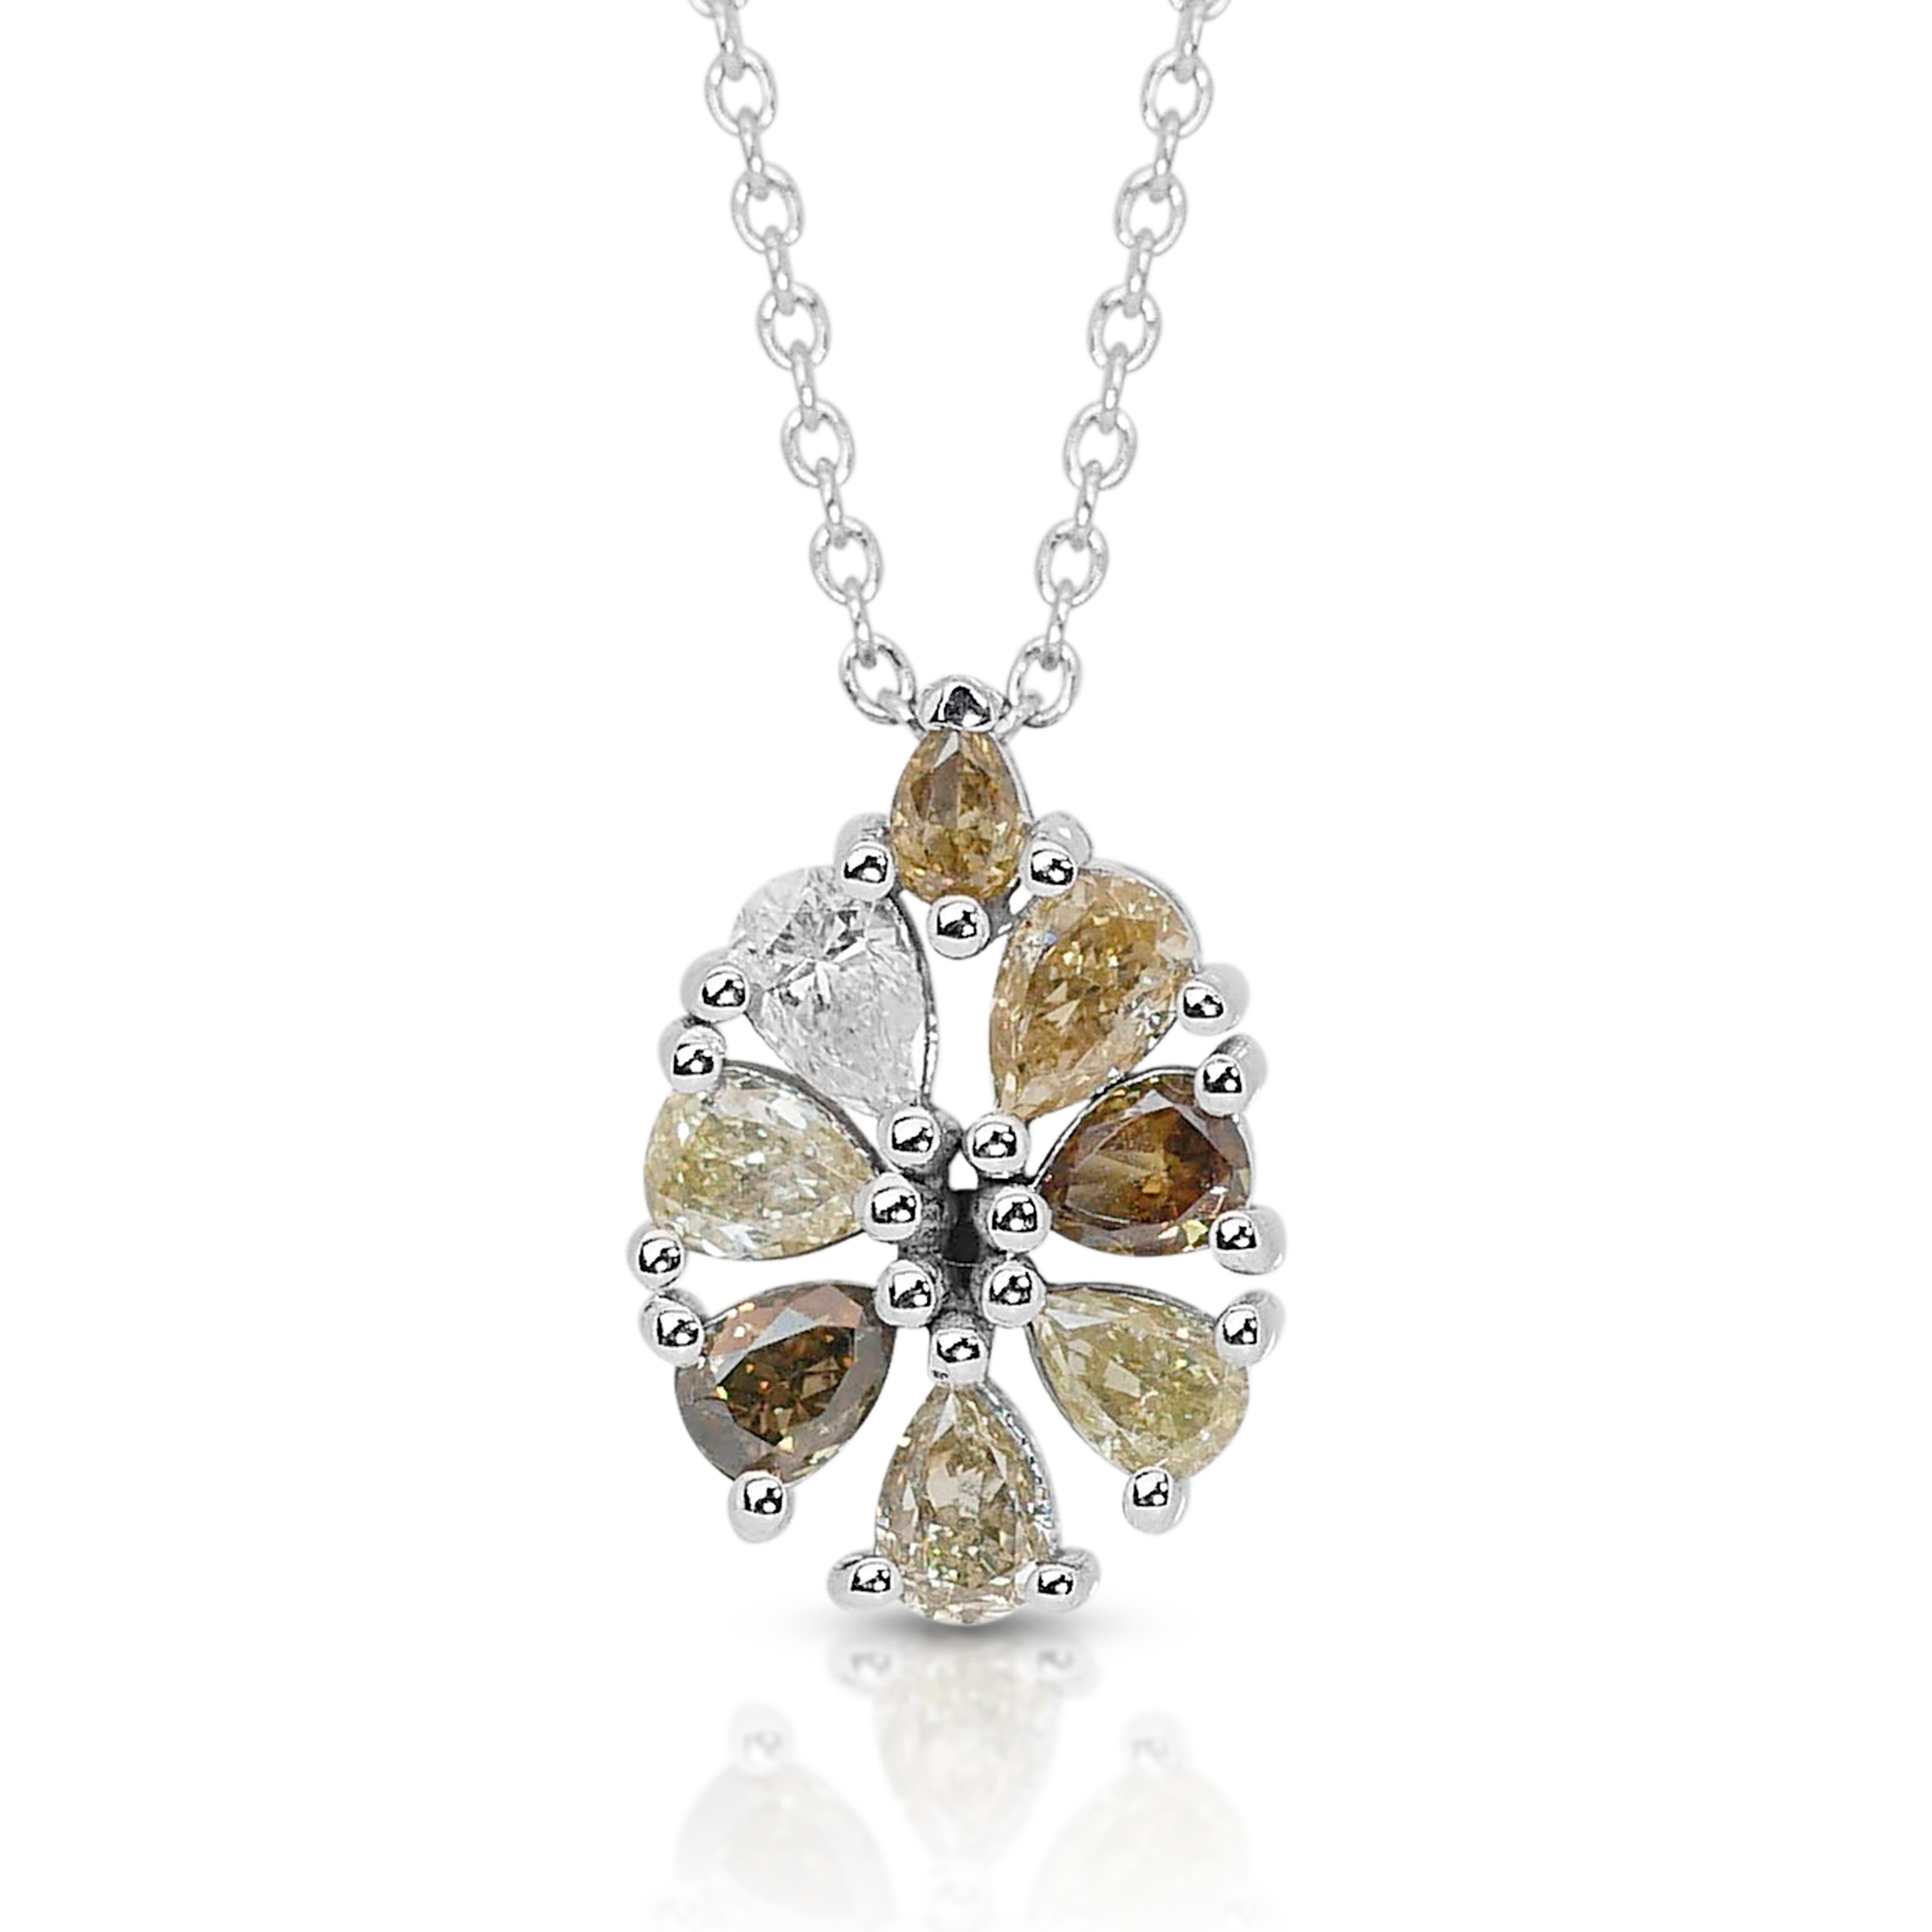 Elegant 18k White Gold Natural Diamond Necklace with Pendant w/0.90 ct - IGI Certified

A captivating 18k white gold diamond necklace featuring a unique display of 0.90 total carat weight pear-shaped diamonds. The necklace showcases a beautiful